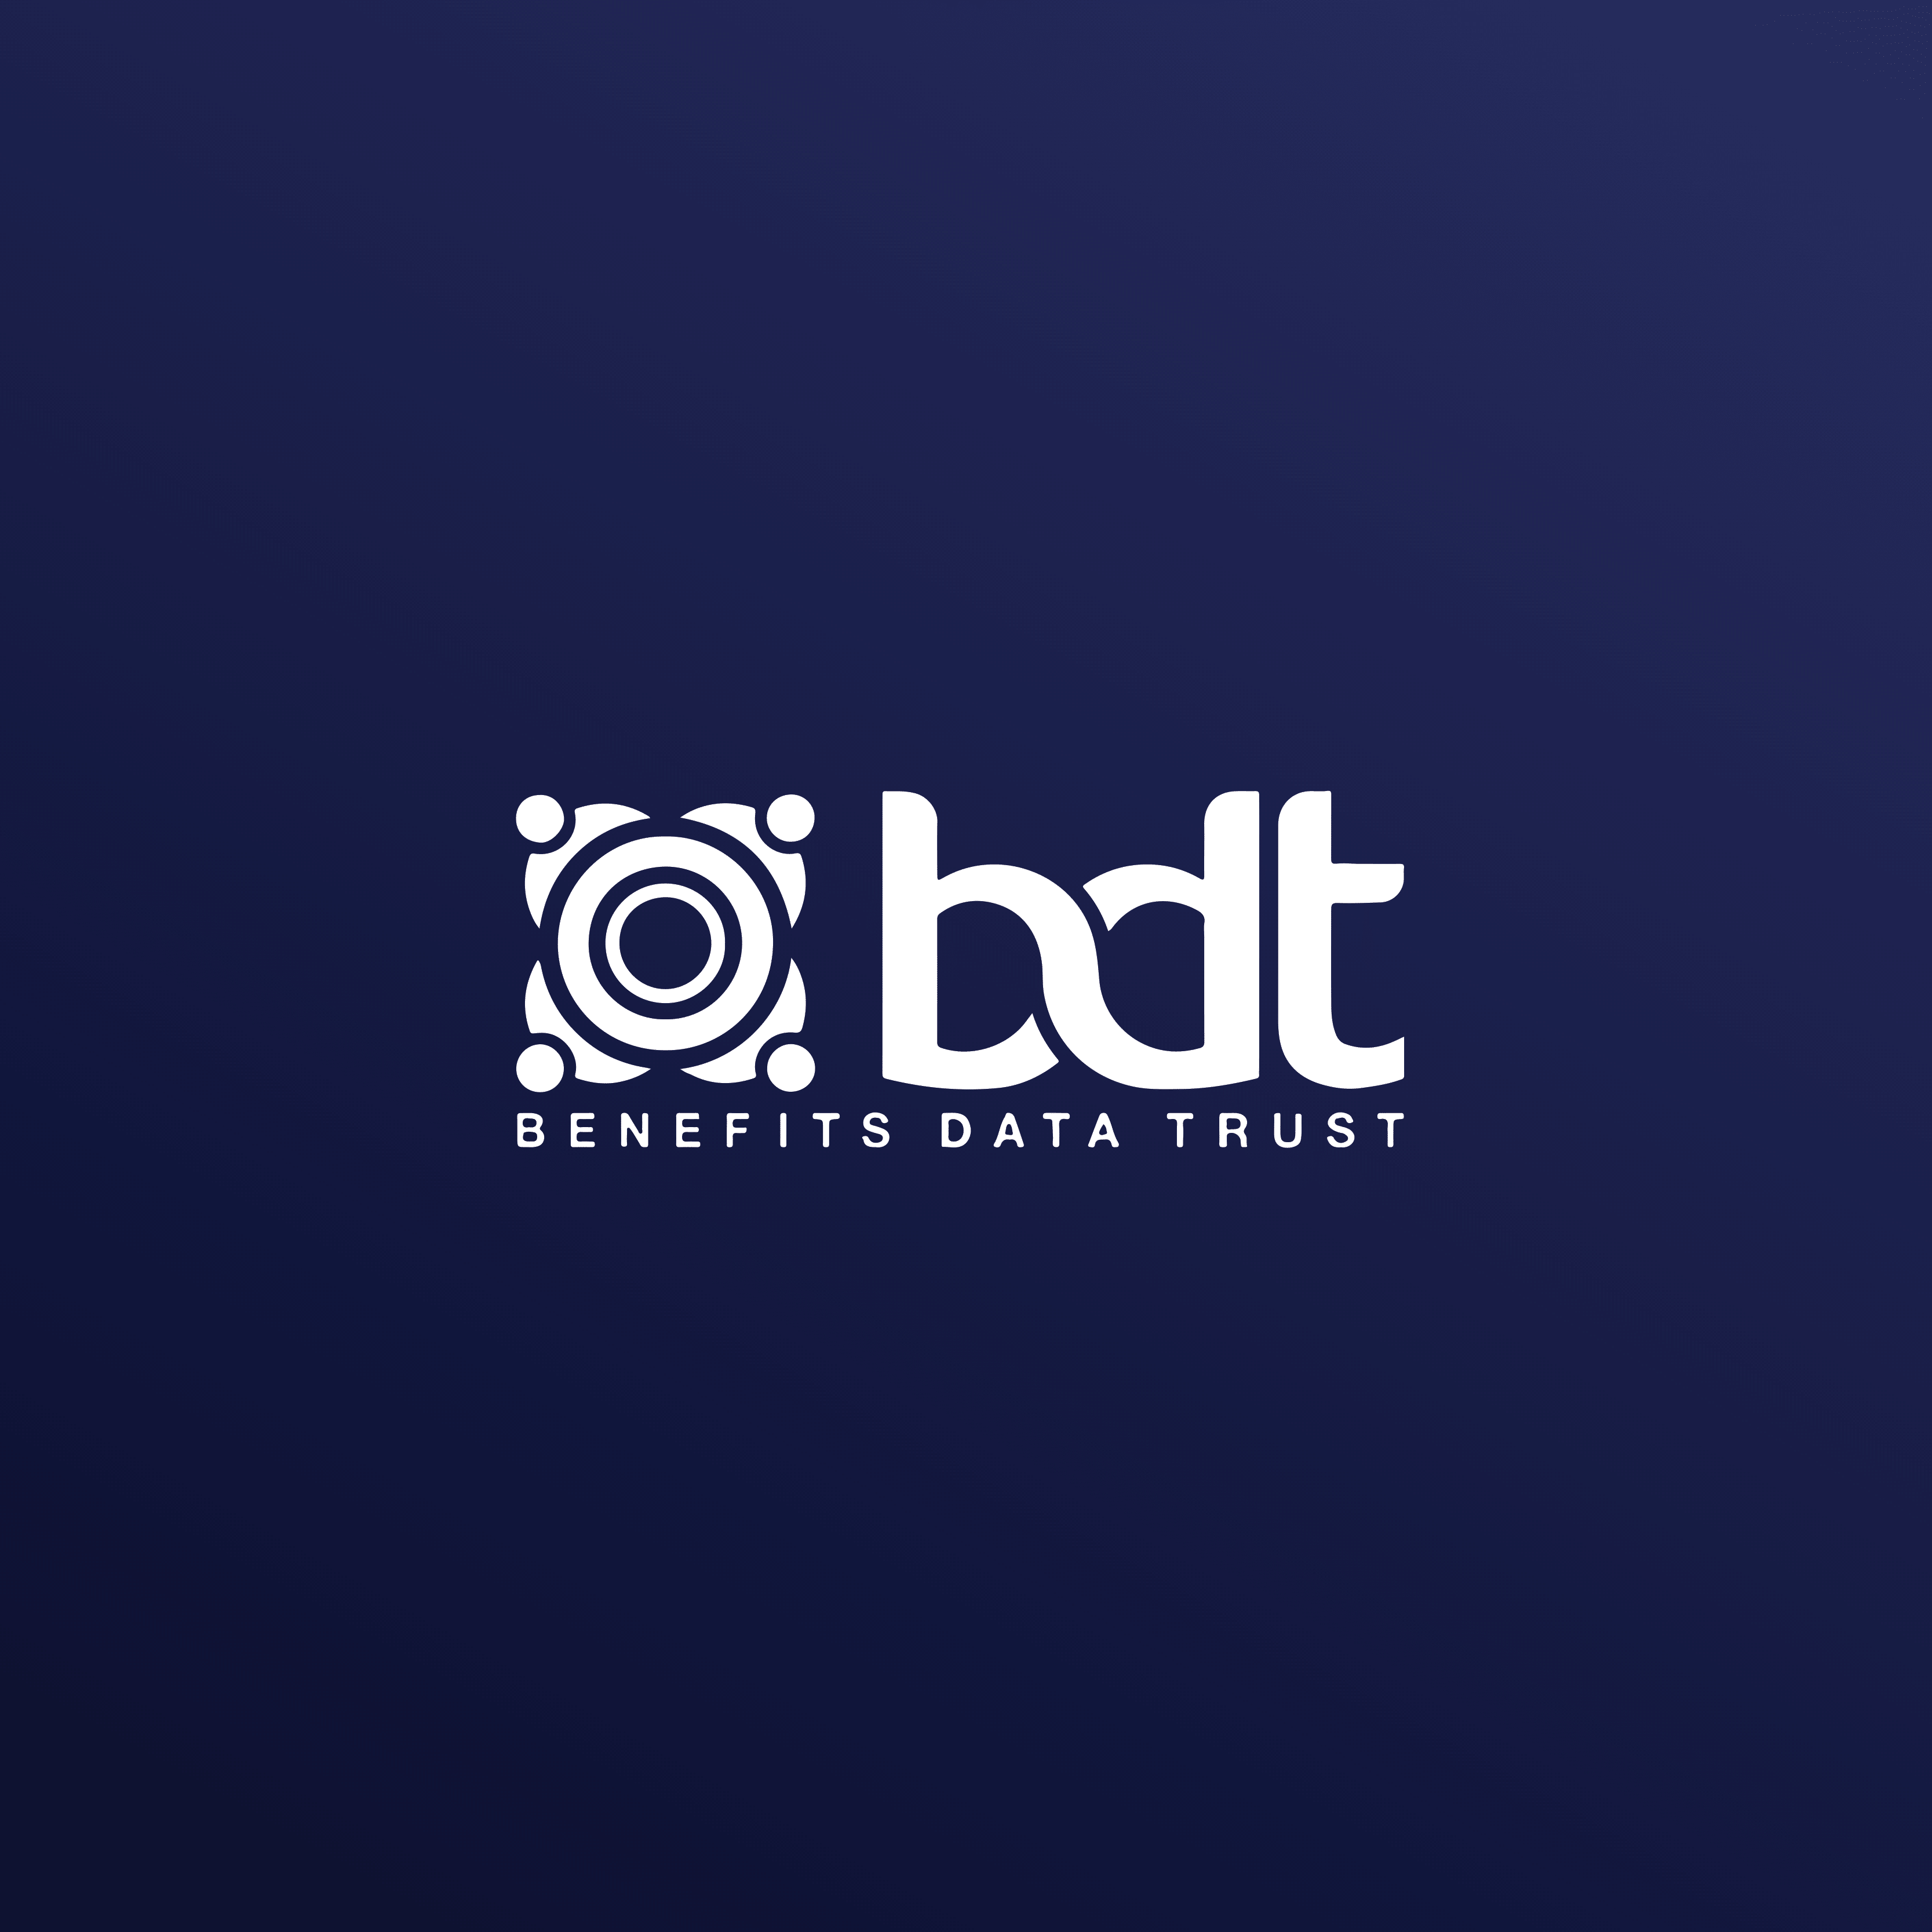 The Benefits Data Trust logo in white on a blue gradient background. 